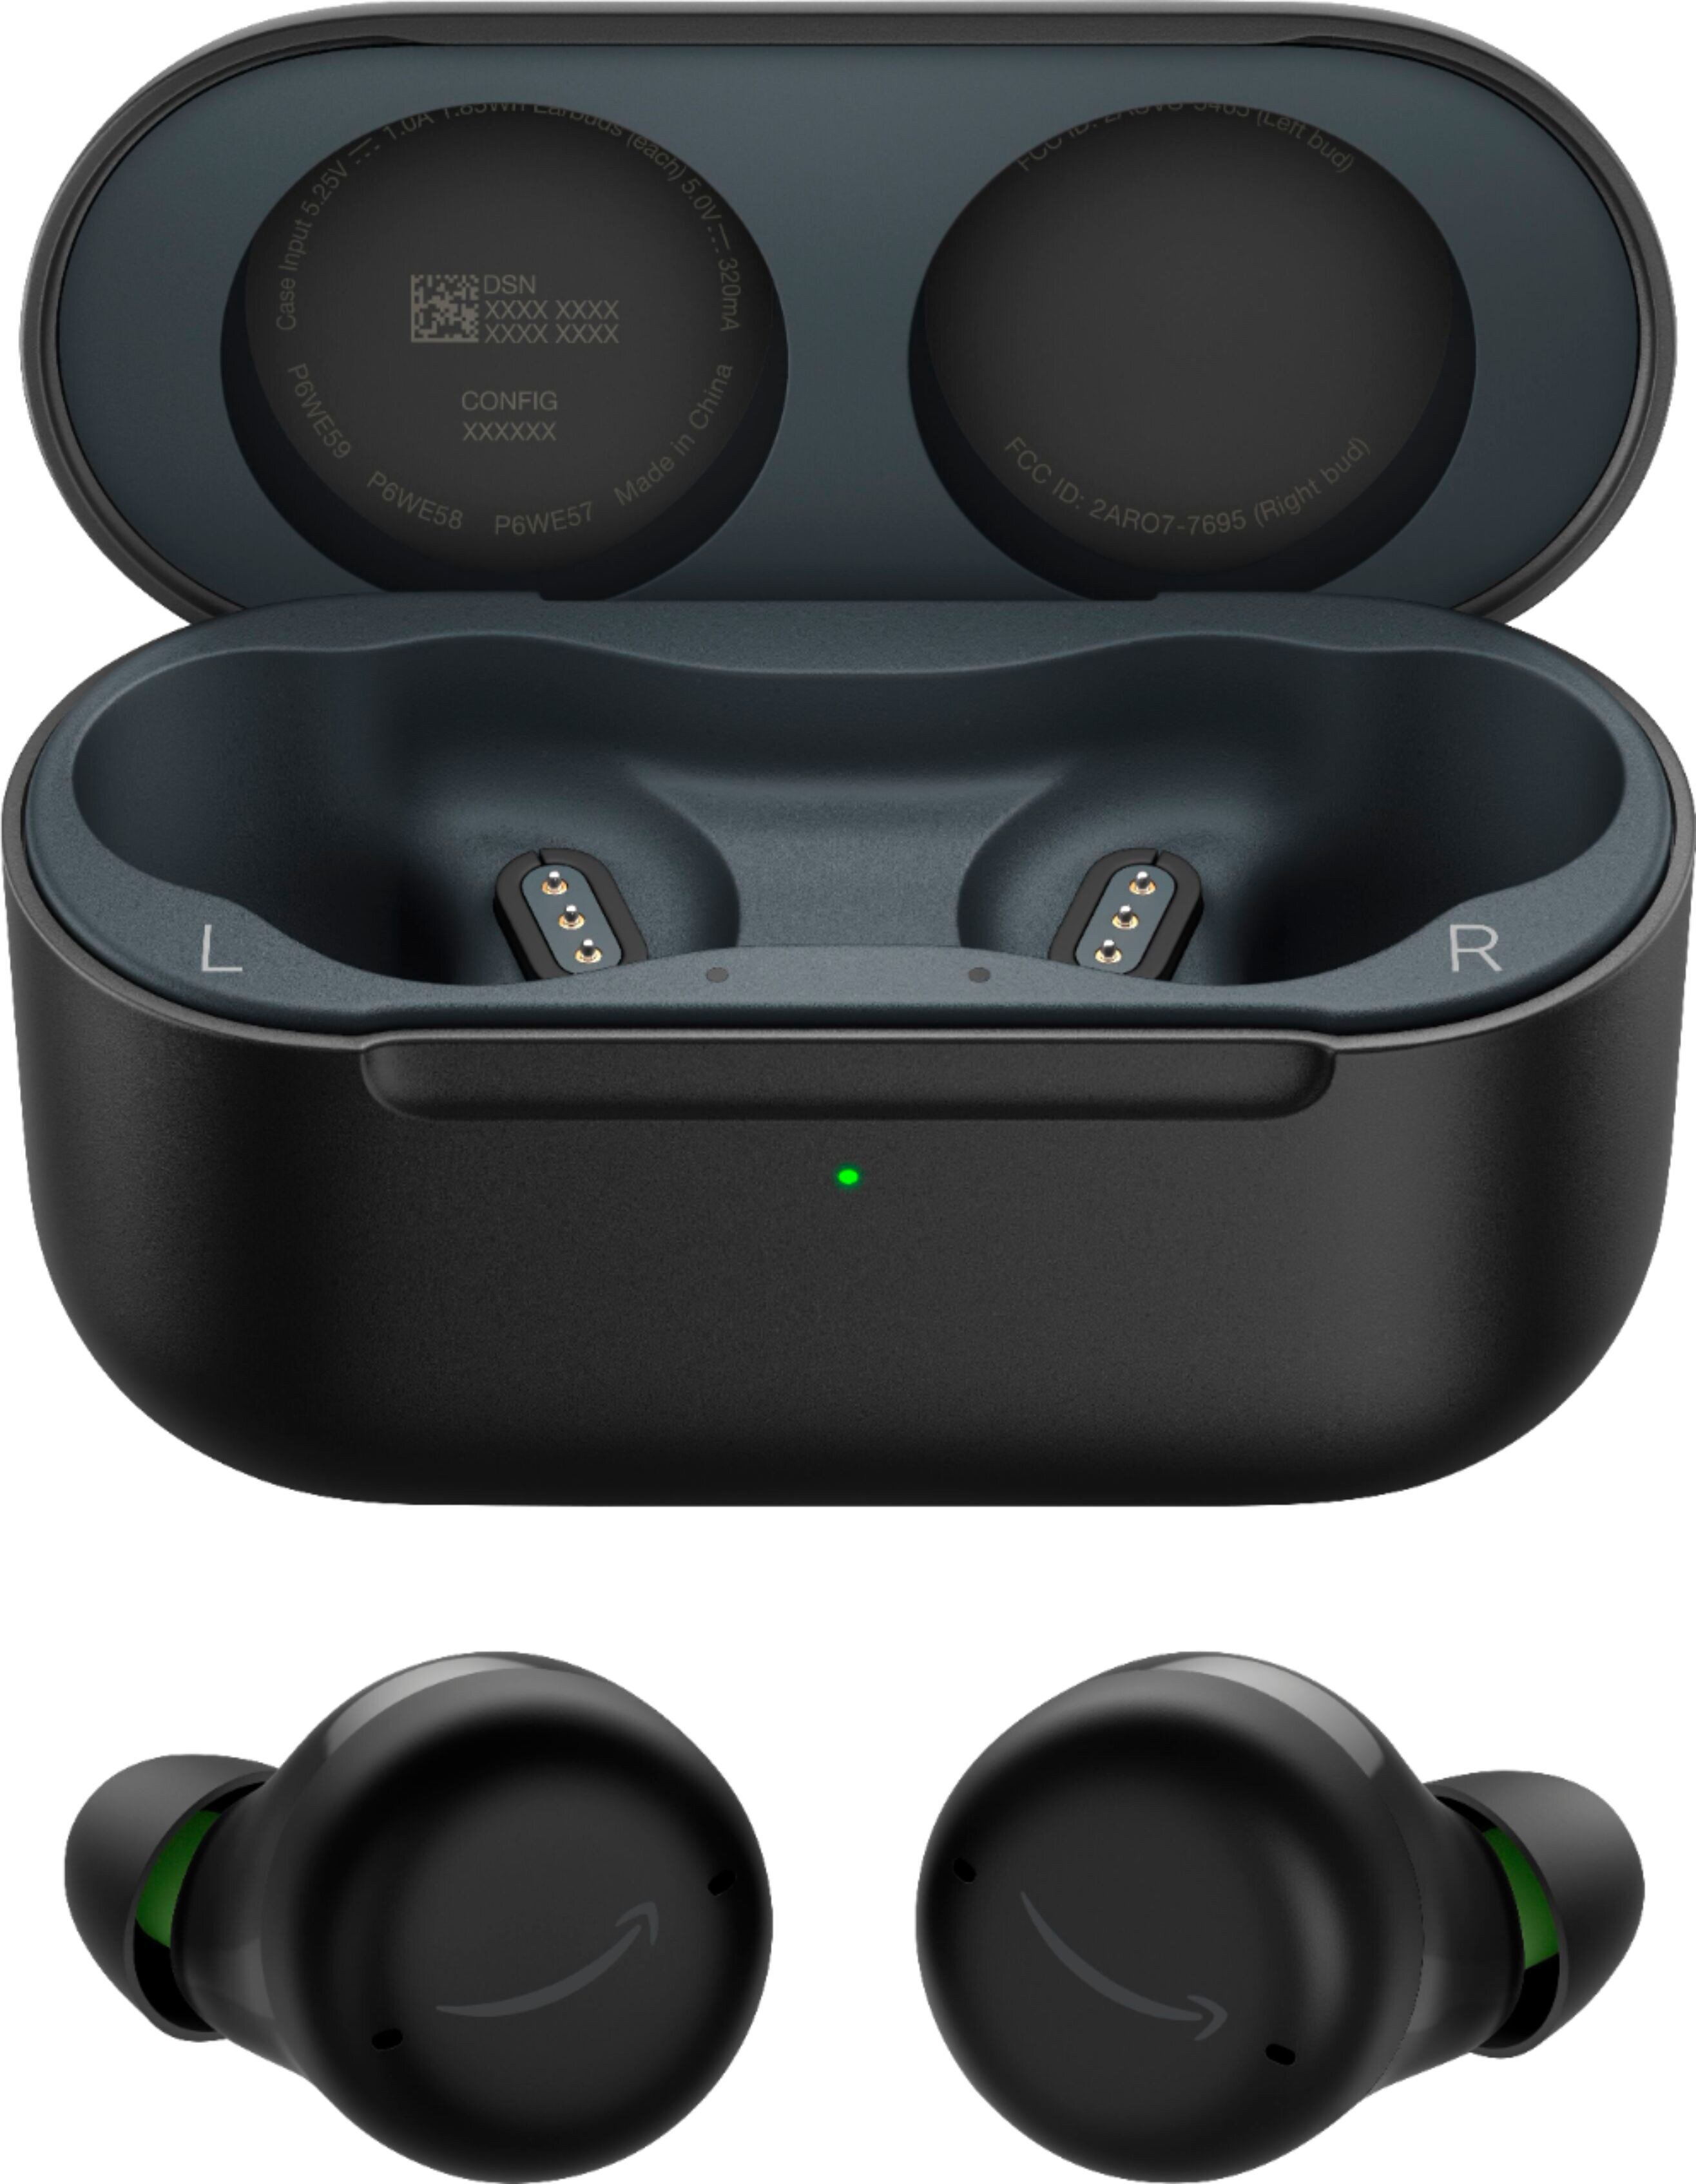 https://www.tejar.com/media/catalog/product/cache/1/image/9df78eab33525d08d6e5fb8d27136e95/a/m/amazon_echo_buds_2nd_gen_wireless_earbuds_with_active_noise_cancellation_and_alexa_1-_tejar.jpg